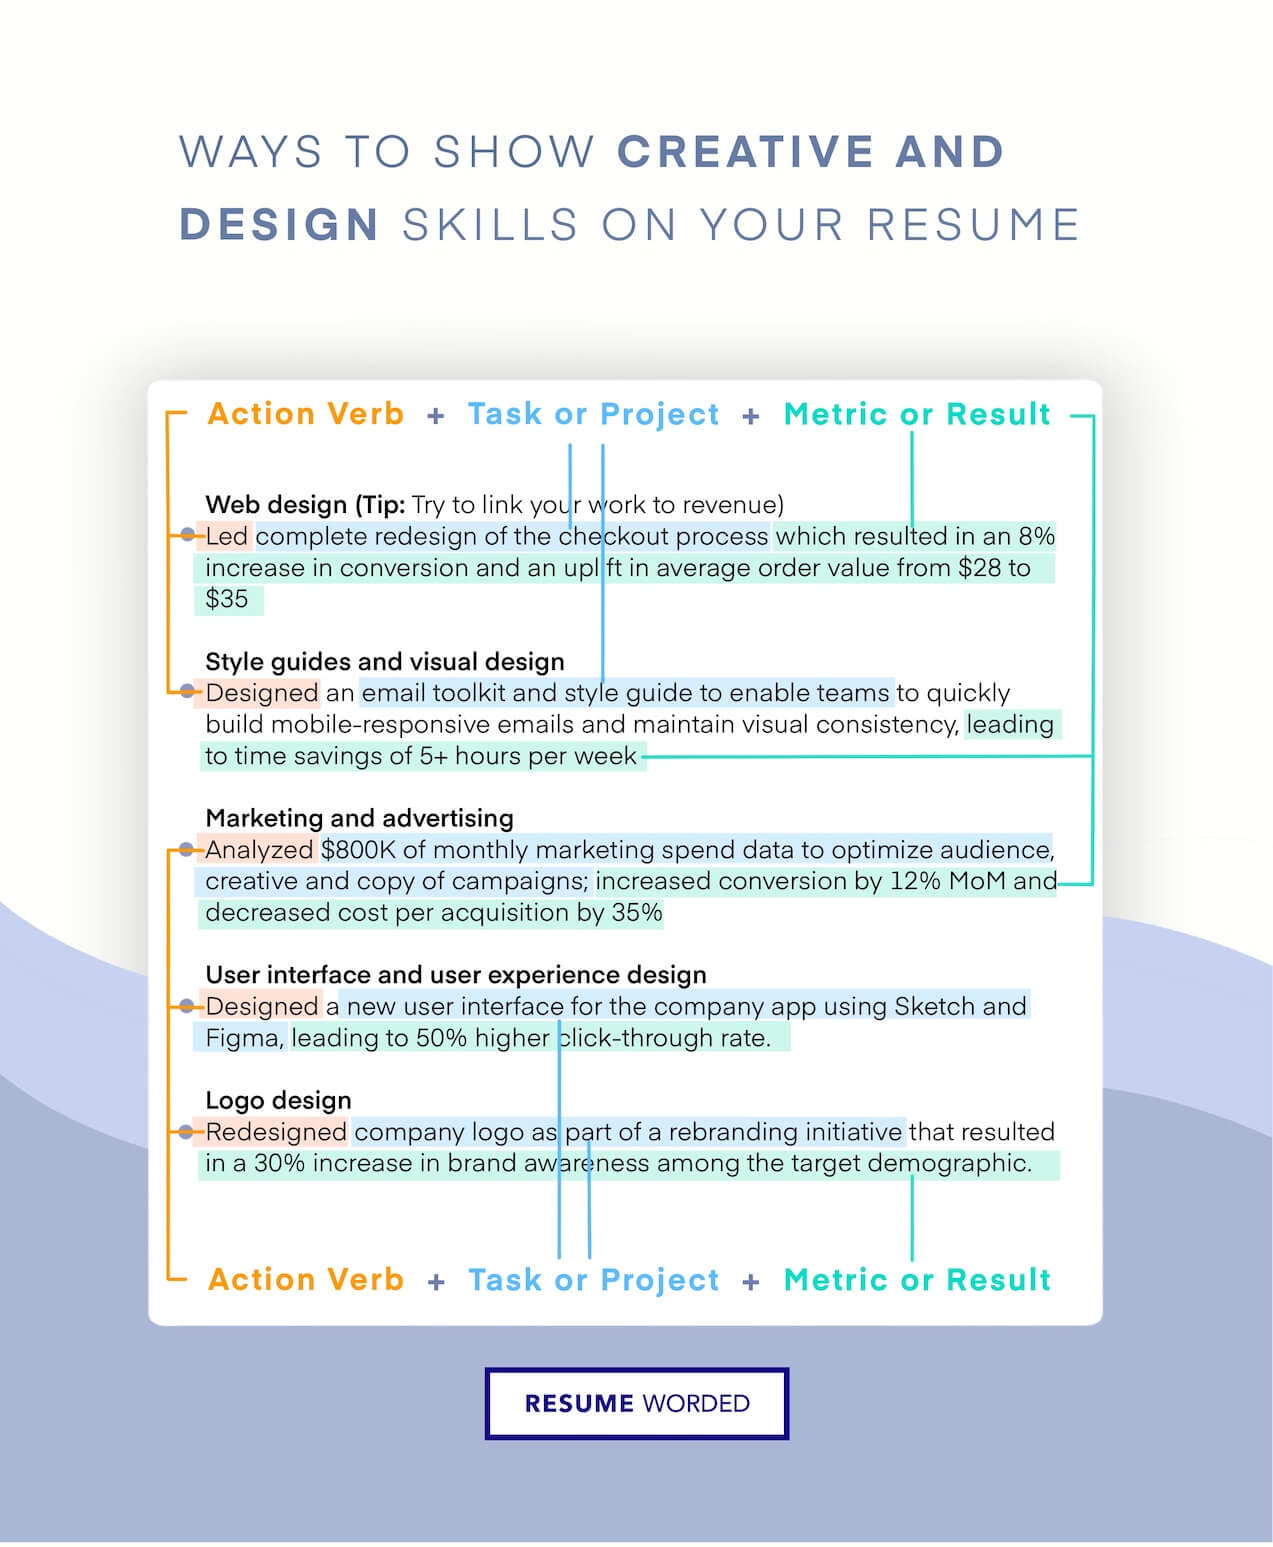 Detail your architectural design experience - Software Architect CV